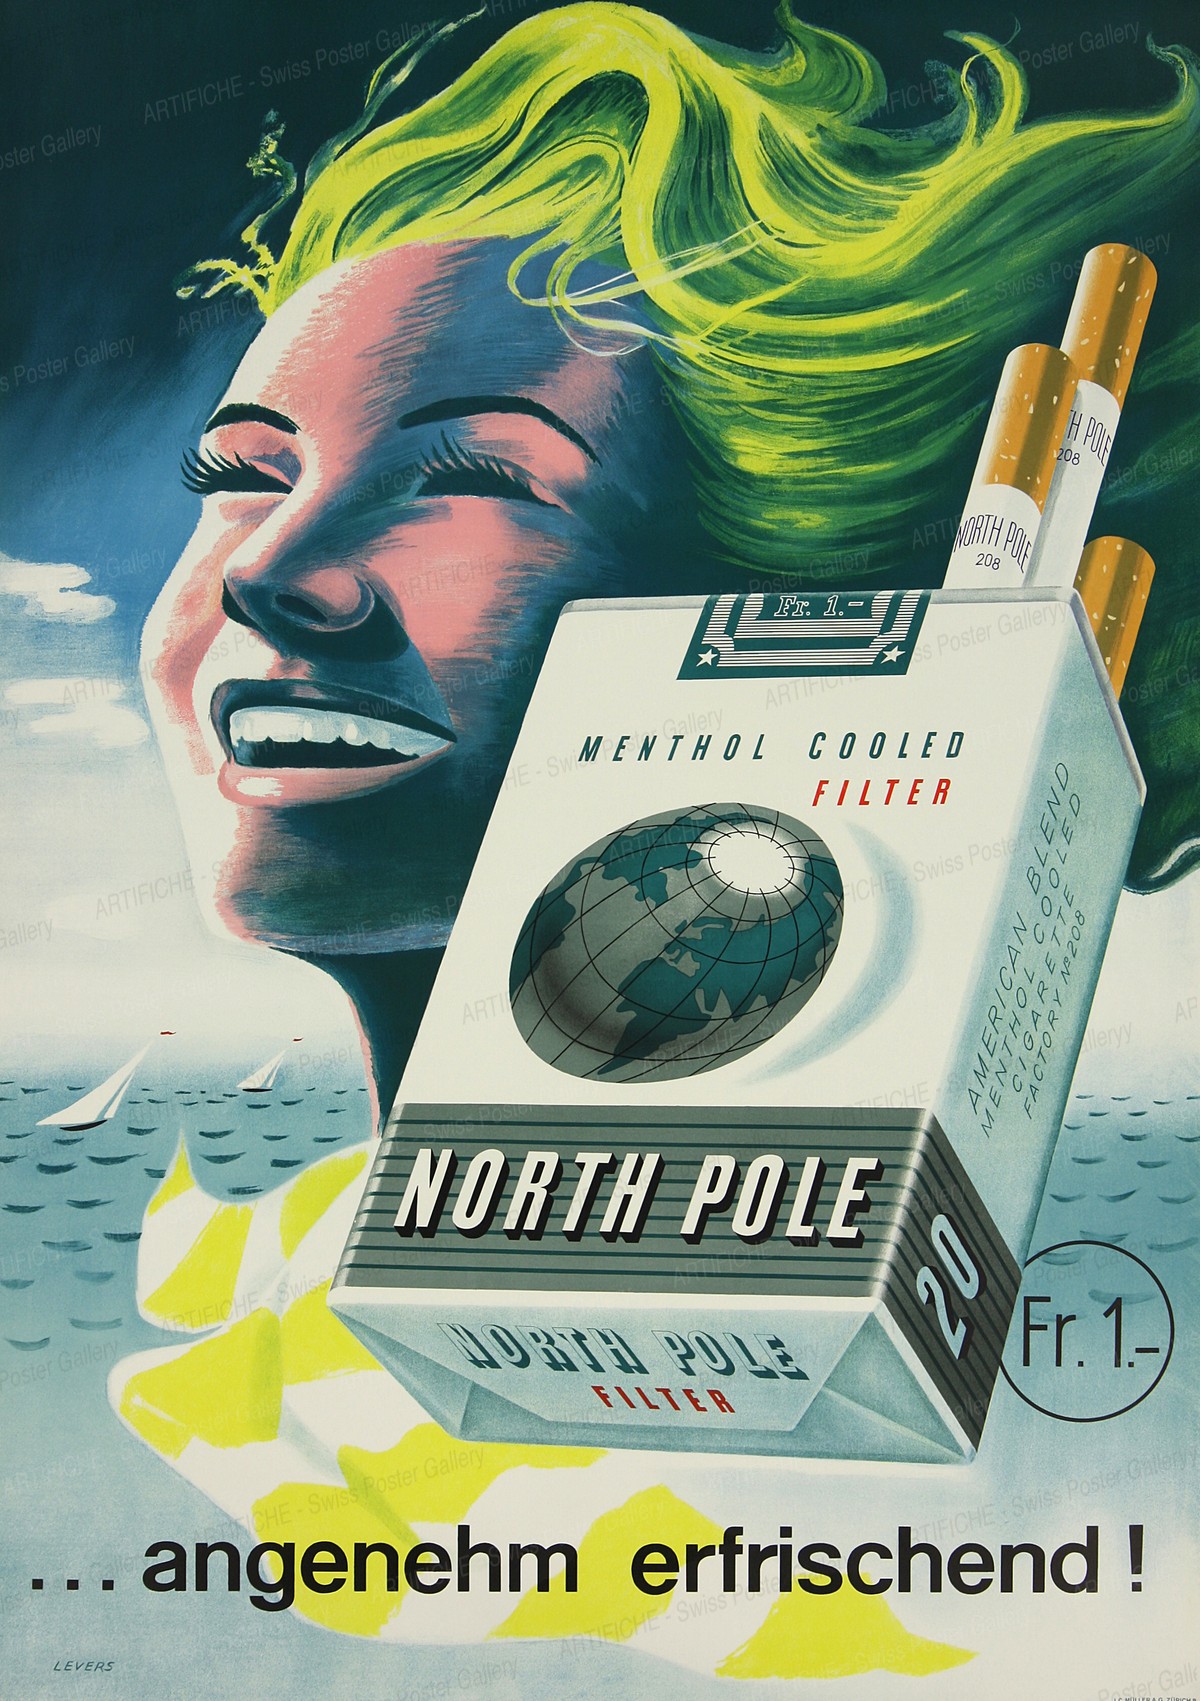 NORTH POLE MENTHOL COOLED FILTER, Rudolph Levers